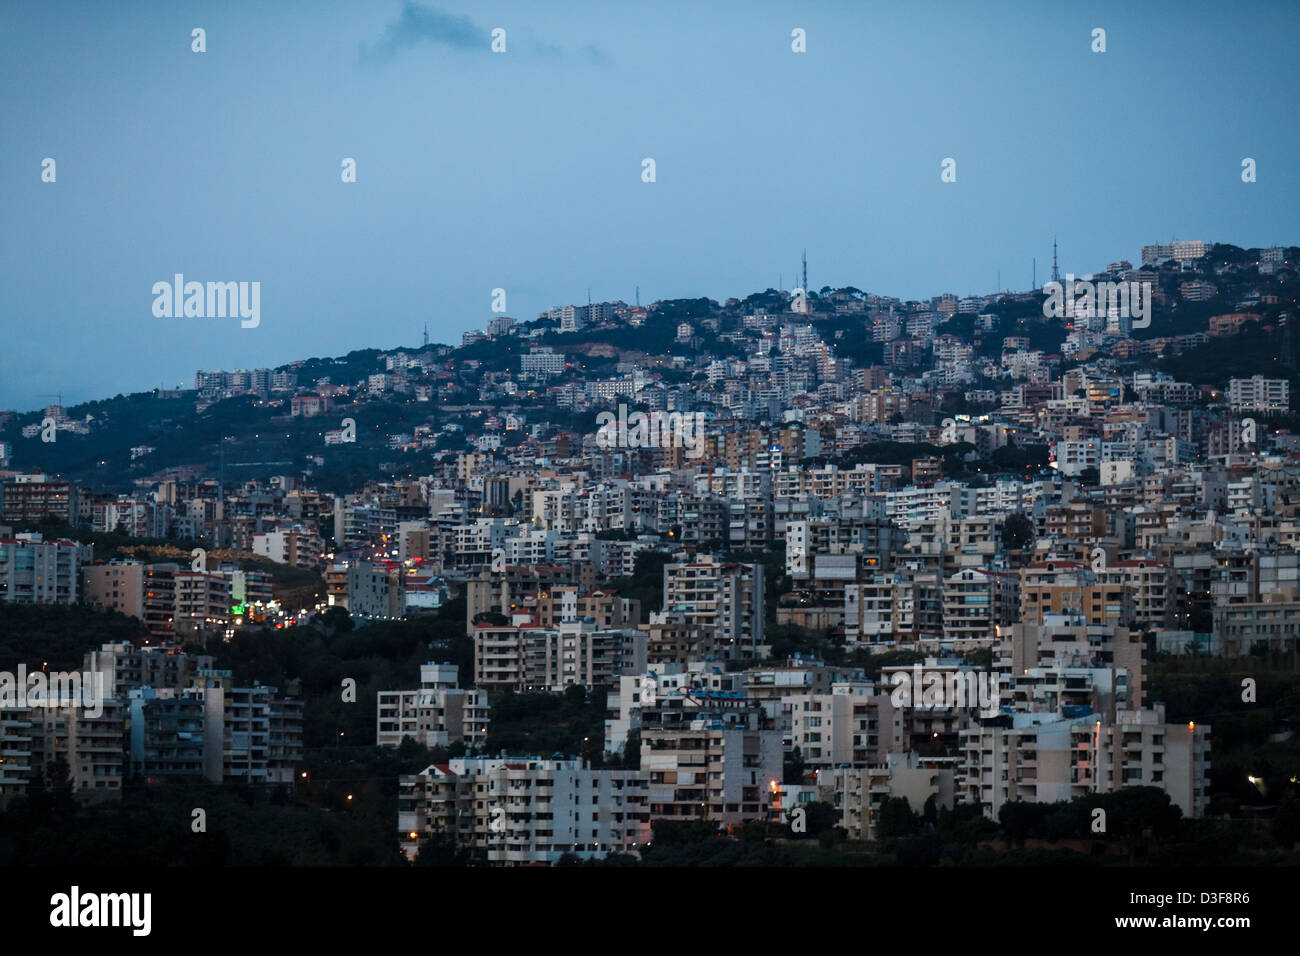 View of Beirut, Lebanon. The locals sometimes call Beirut 'the vity of concrete'. Stock Photo